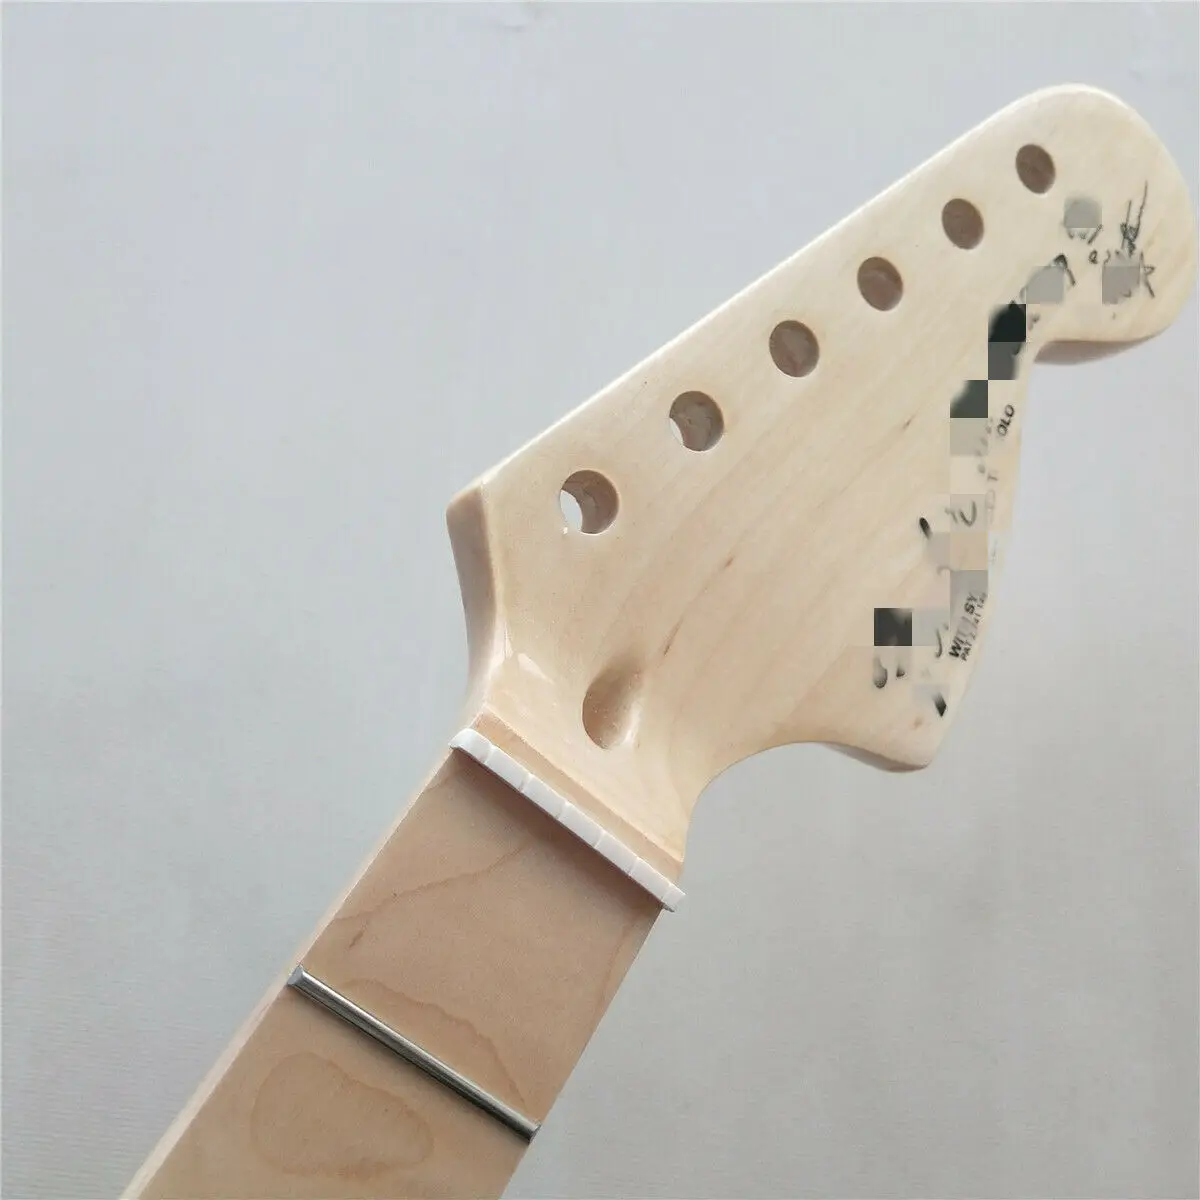 22 fret 25.5 inch Big head Guitar neck Maple Maple Fingerboard dot Inlay Gloss New Replacement